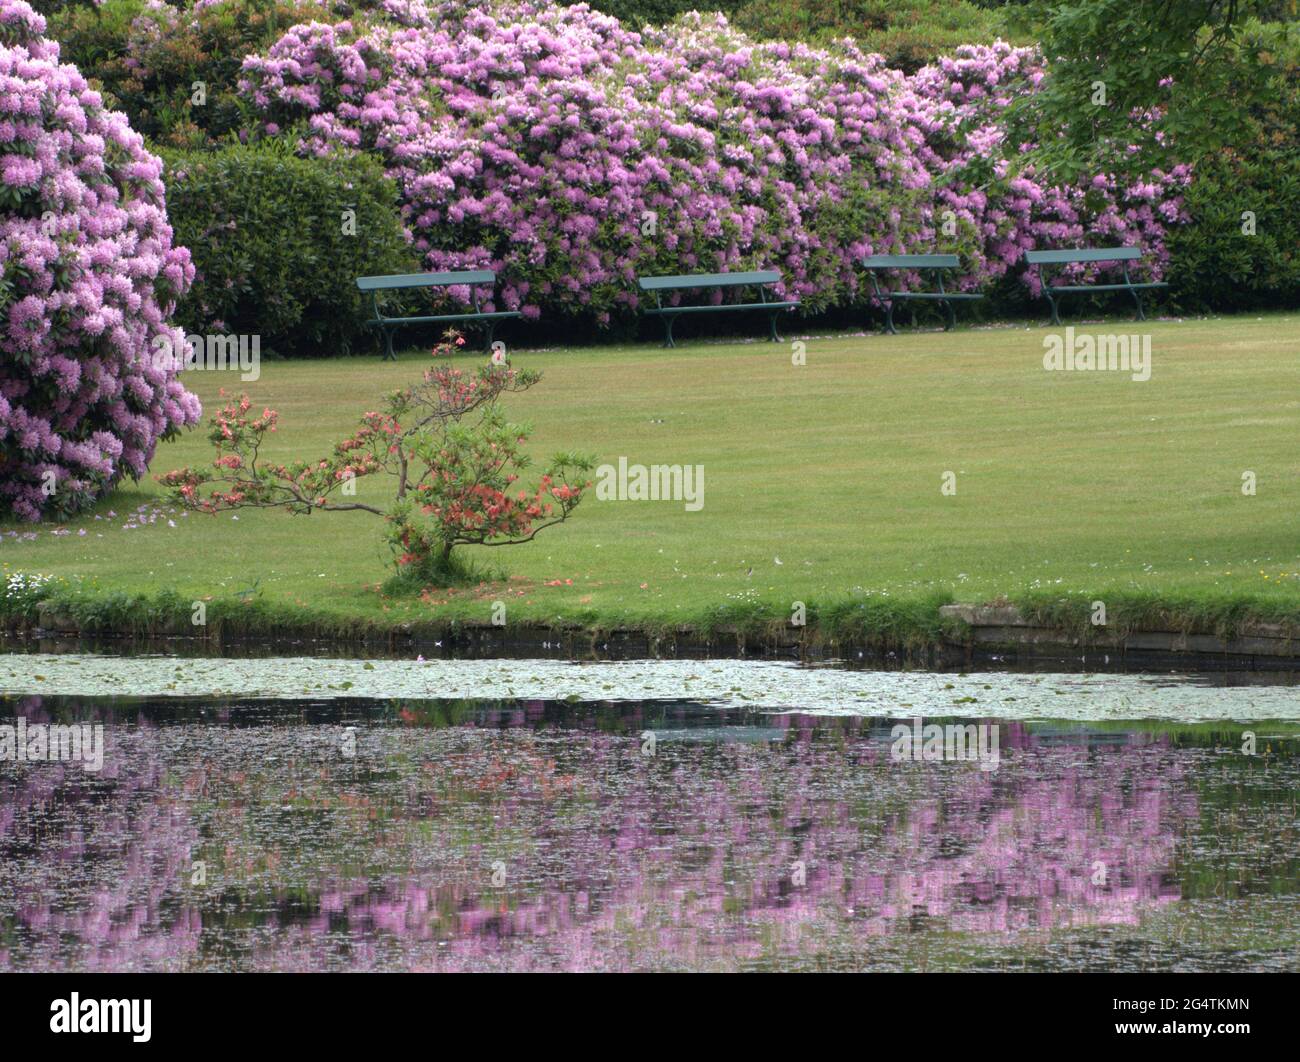 Rhododendron Bushes in full flower in the historic seeing of Gawsworth Hall gardens Stock Photo